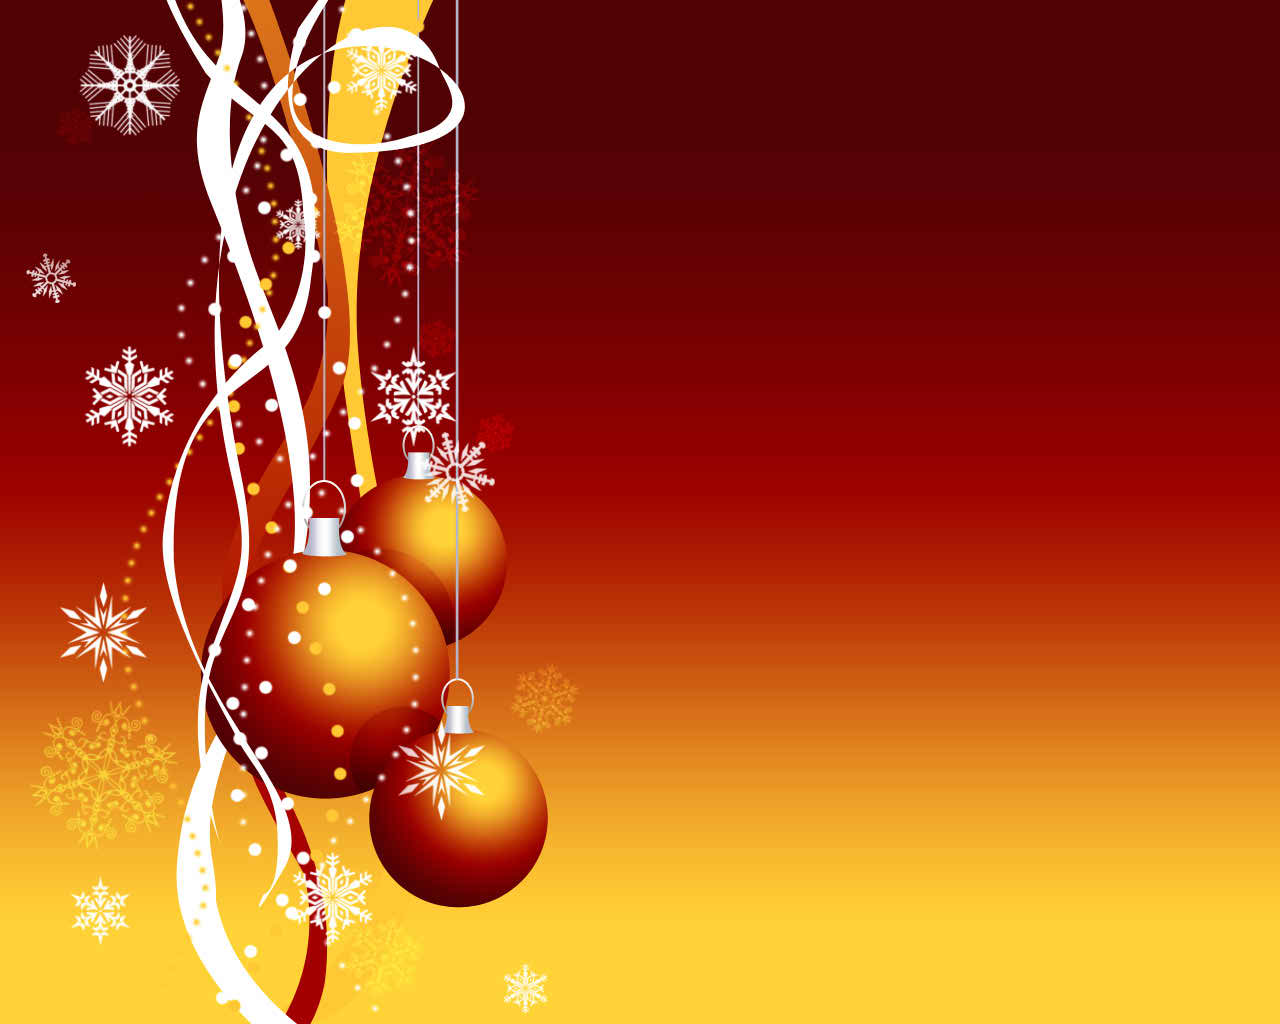 art holiday wallpapers image